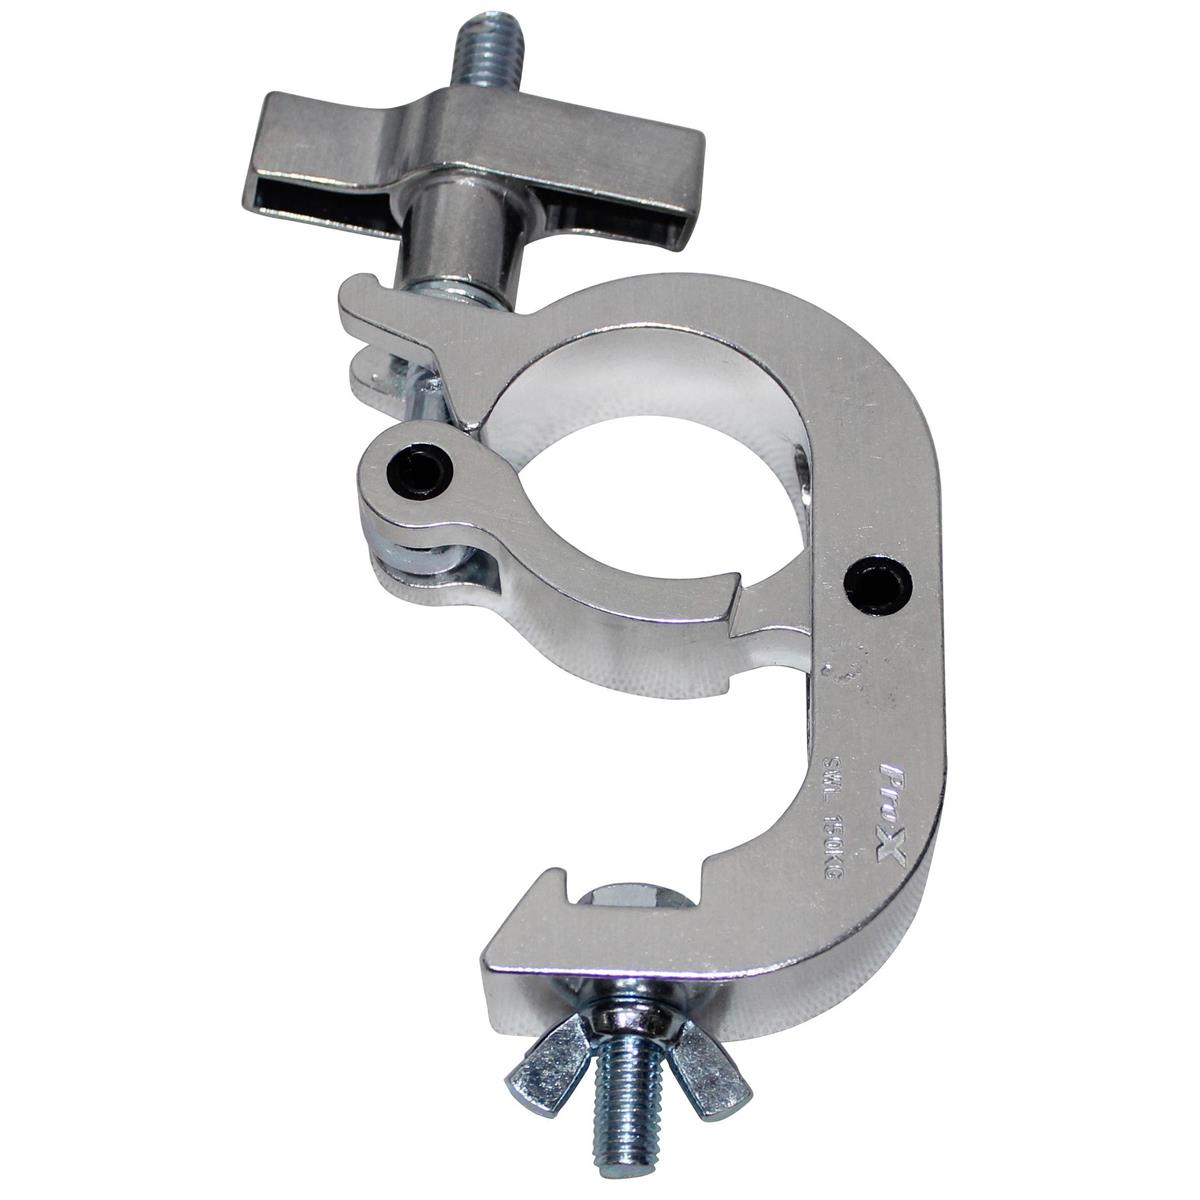 

ProX T-C5H Heavy Duty Trigger-Style Aluminum Clamp with Big Wing for 2" Tubing